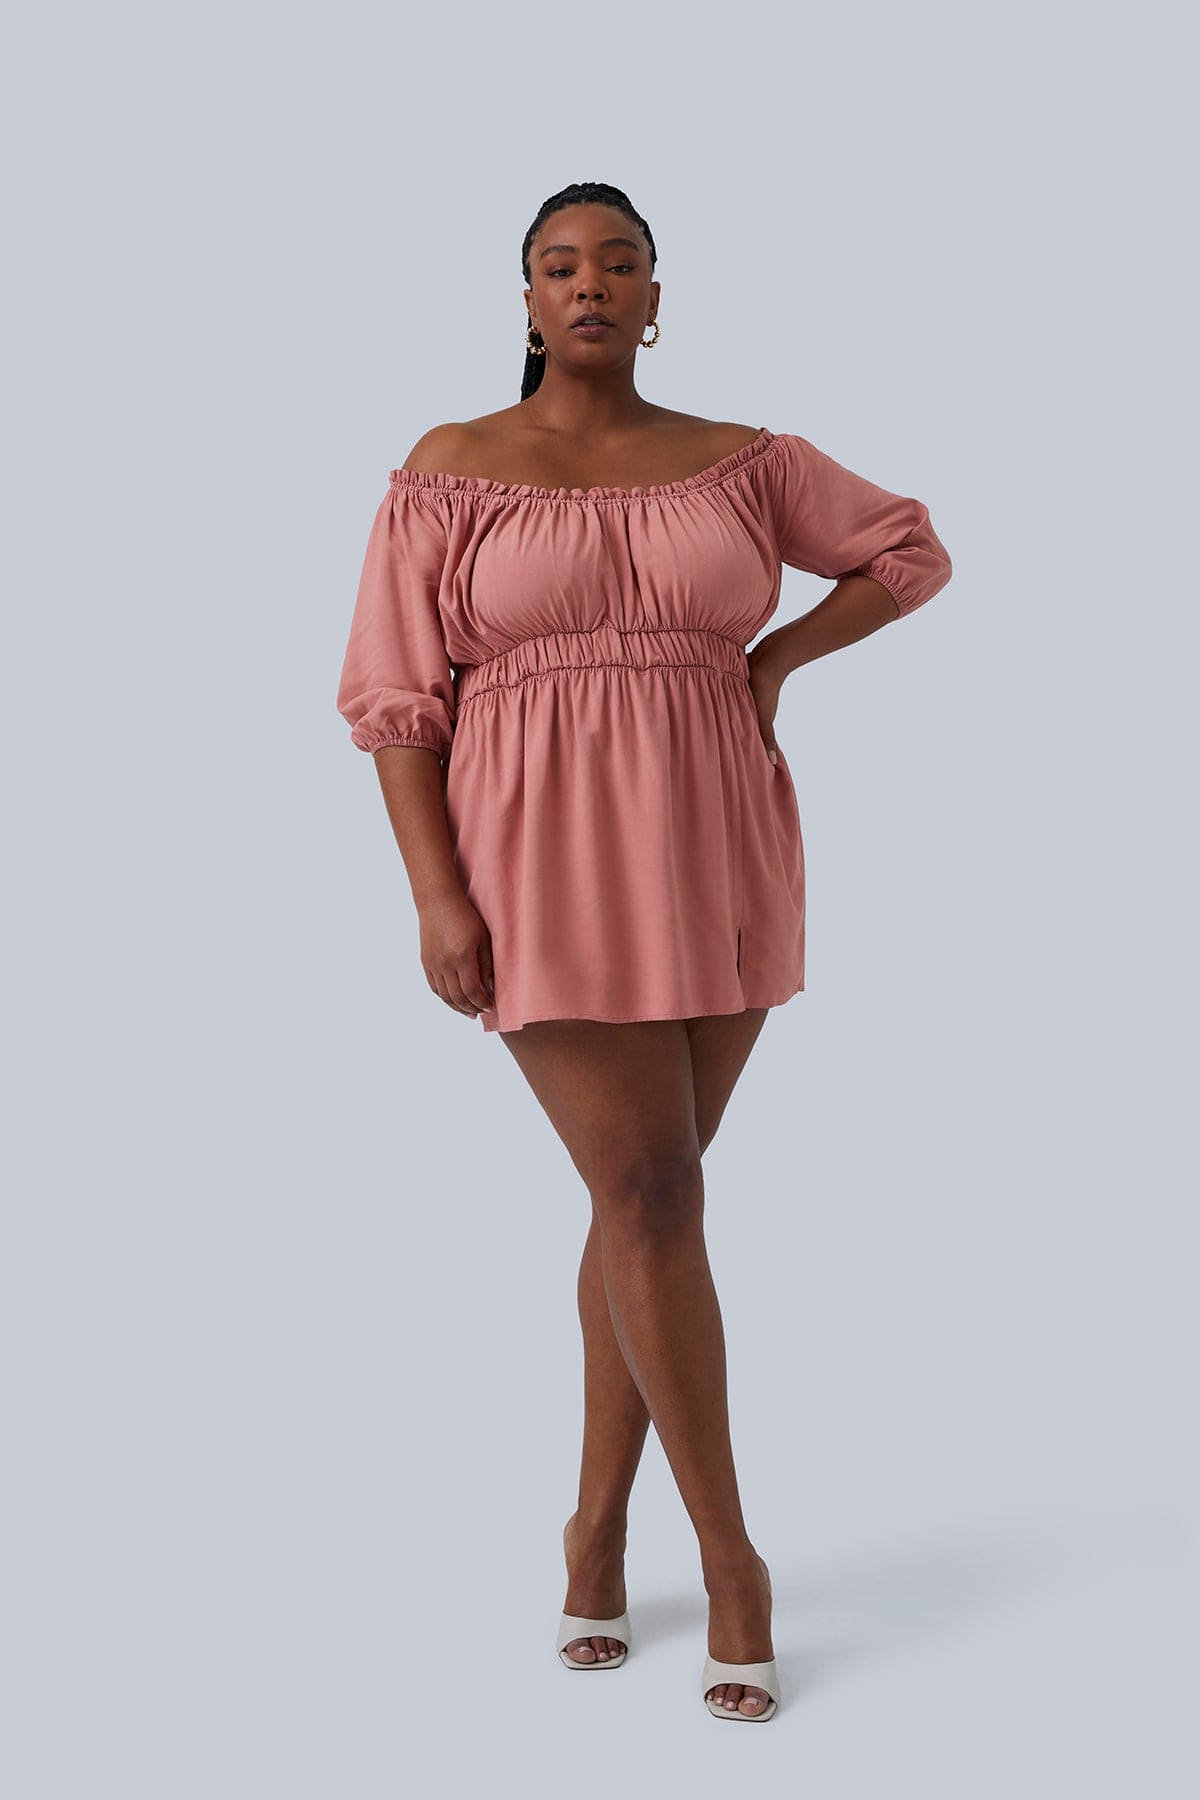 Model standing with hand on hip and legs crossed wearing the Gianna Mini Dress by Gia IRL in a size 1X. Hair is in braids and in a high pony tail showing small gold hoops. Perfect plus size fashion for women. Paired with white peep toe heels.